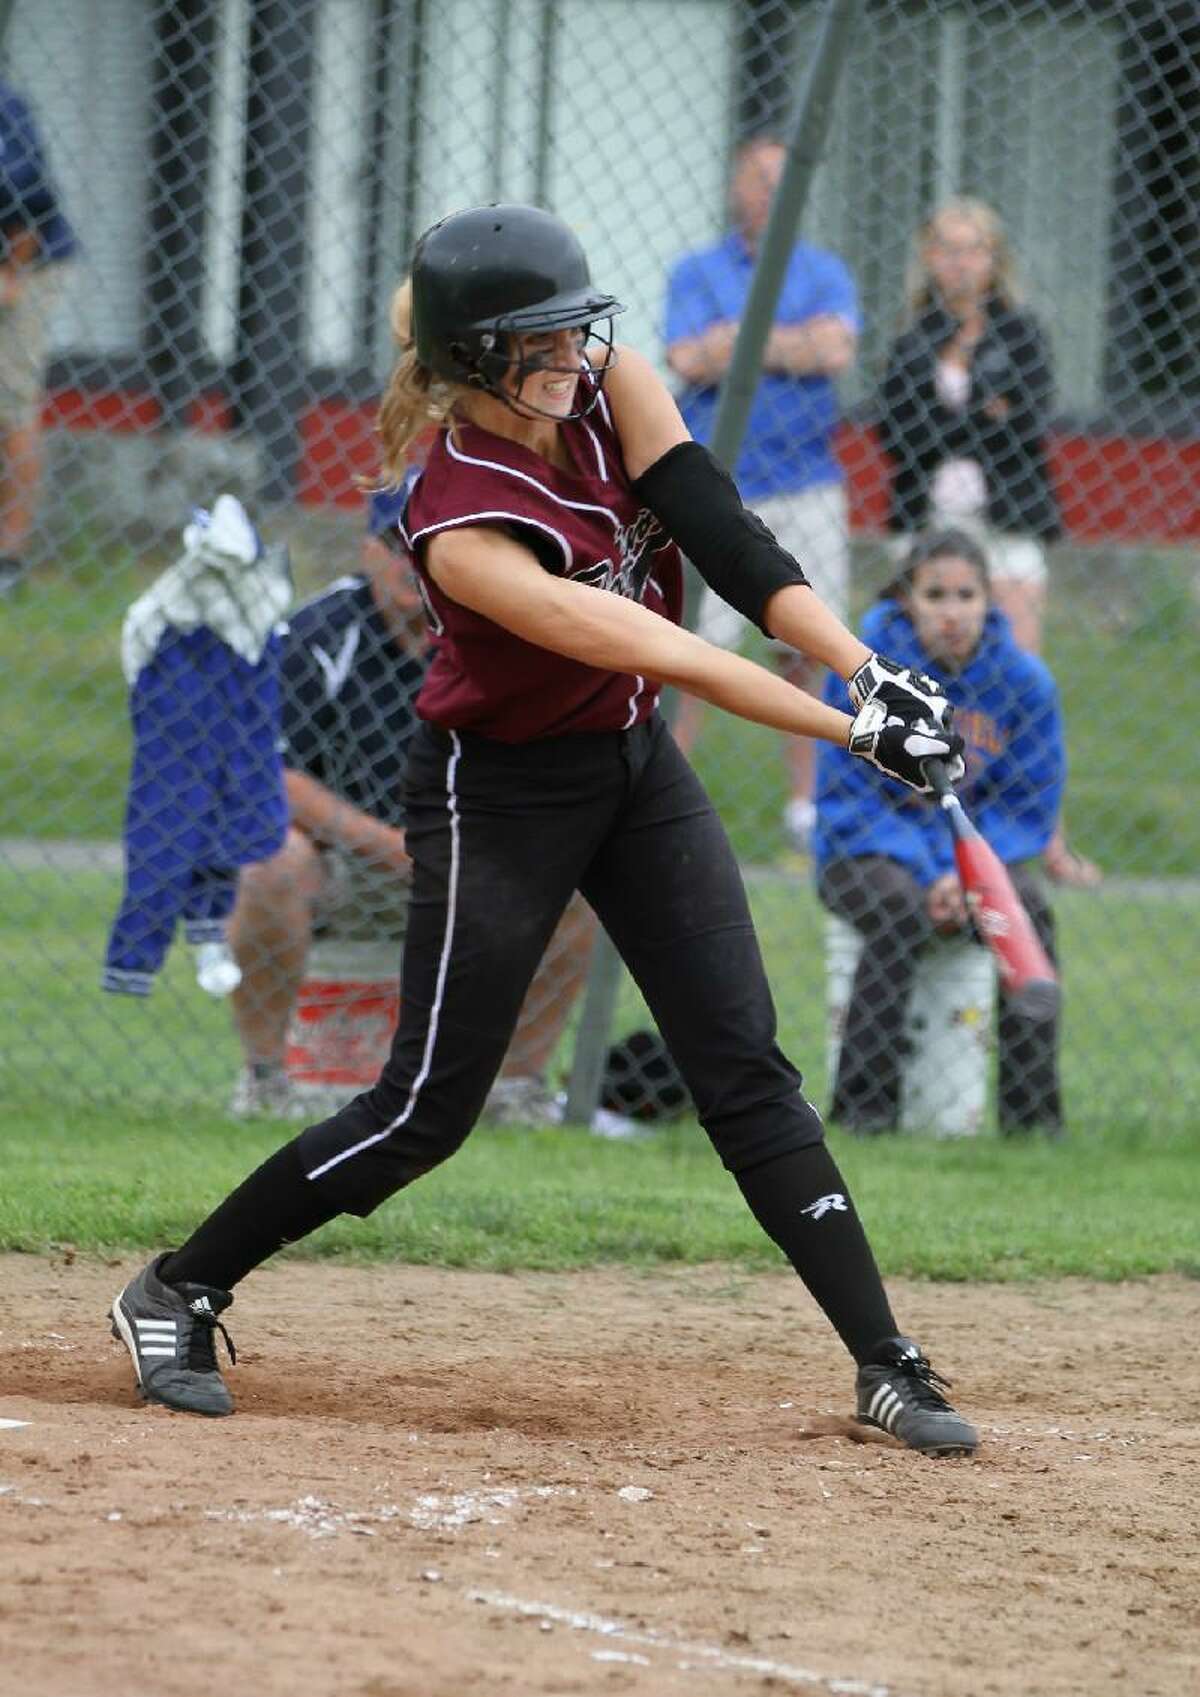 MARIANNE KILLACKEY/Register Citizen Correspondent Torrington's Sydney Matzko follows through on her RBI triple during the bottom of the sixth inning of Friday afternoon's Class L softball quarterfinal game against Brookfield at Torrington High School. The Lady Raiders lost 5-1. Torrington ended its season with a program-best 21-4 record.